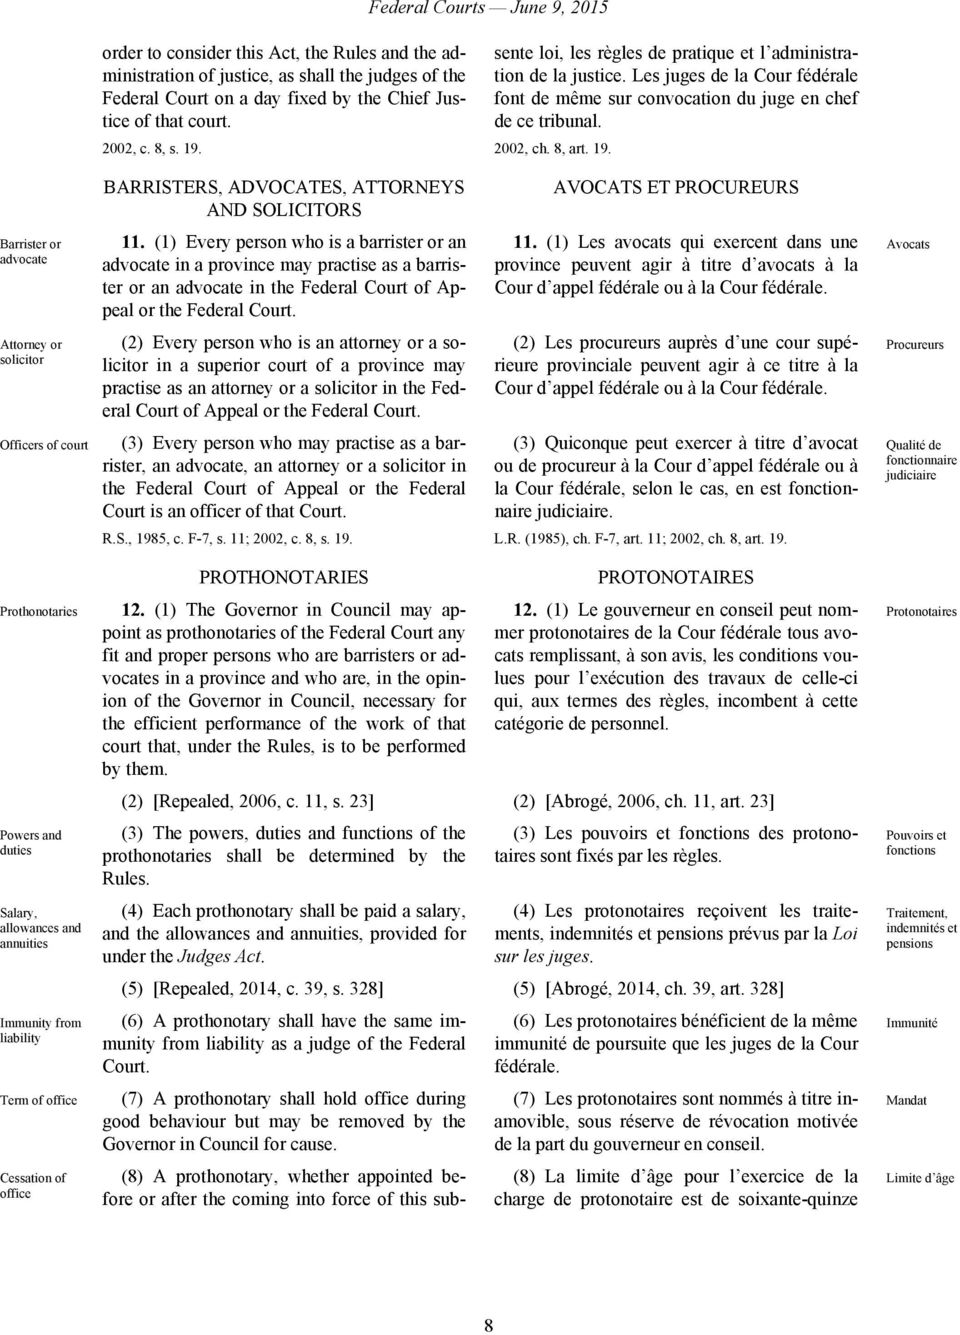 2002, ch. 8, art. 19. BARRISTERS, ADVOCATES, ATTORNEYS AND SOLICITORS AVOCATS ET PROCUREURS Barrister or advocate 11.